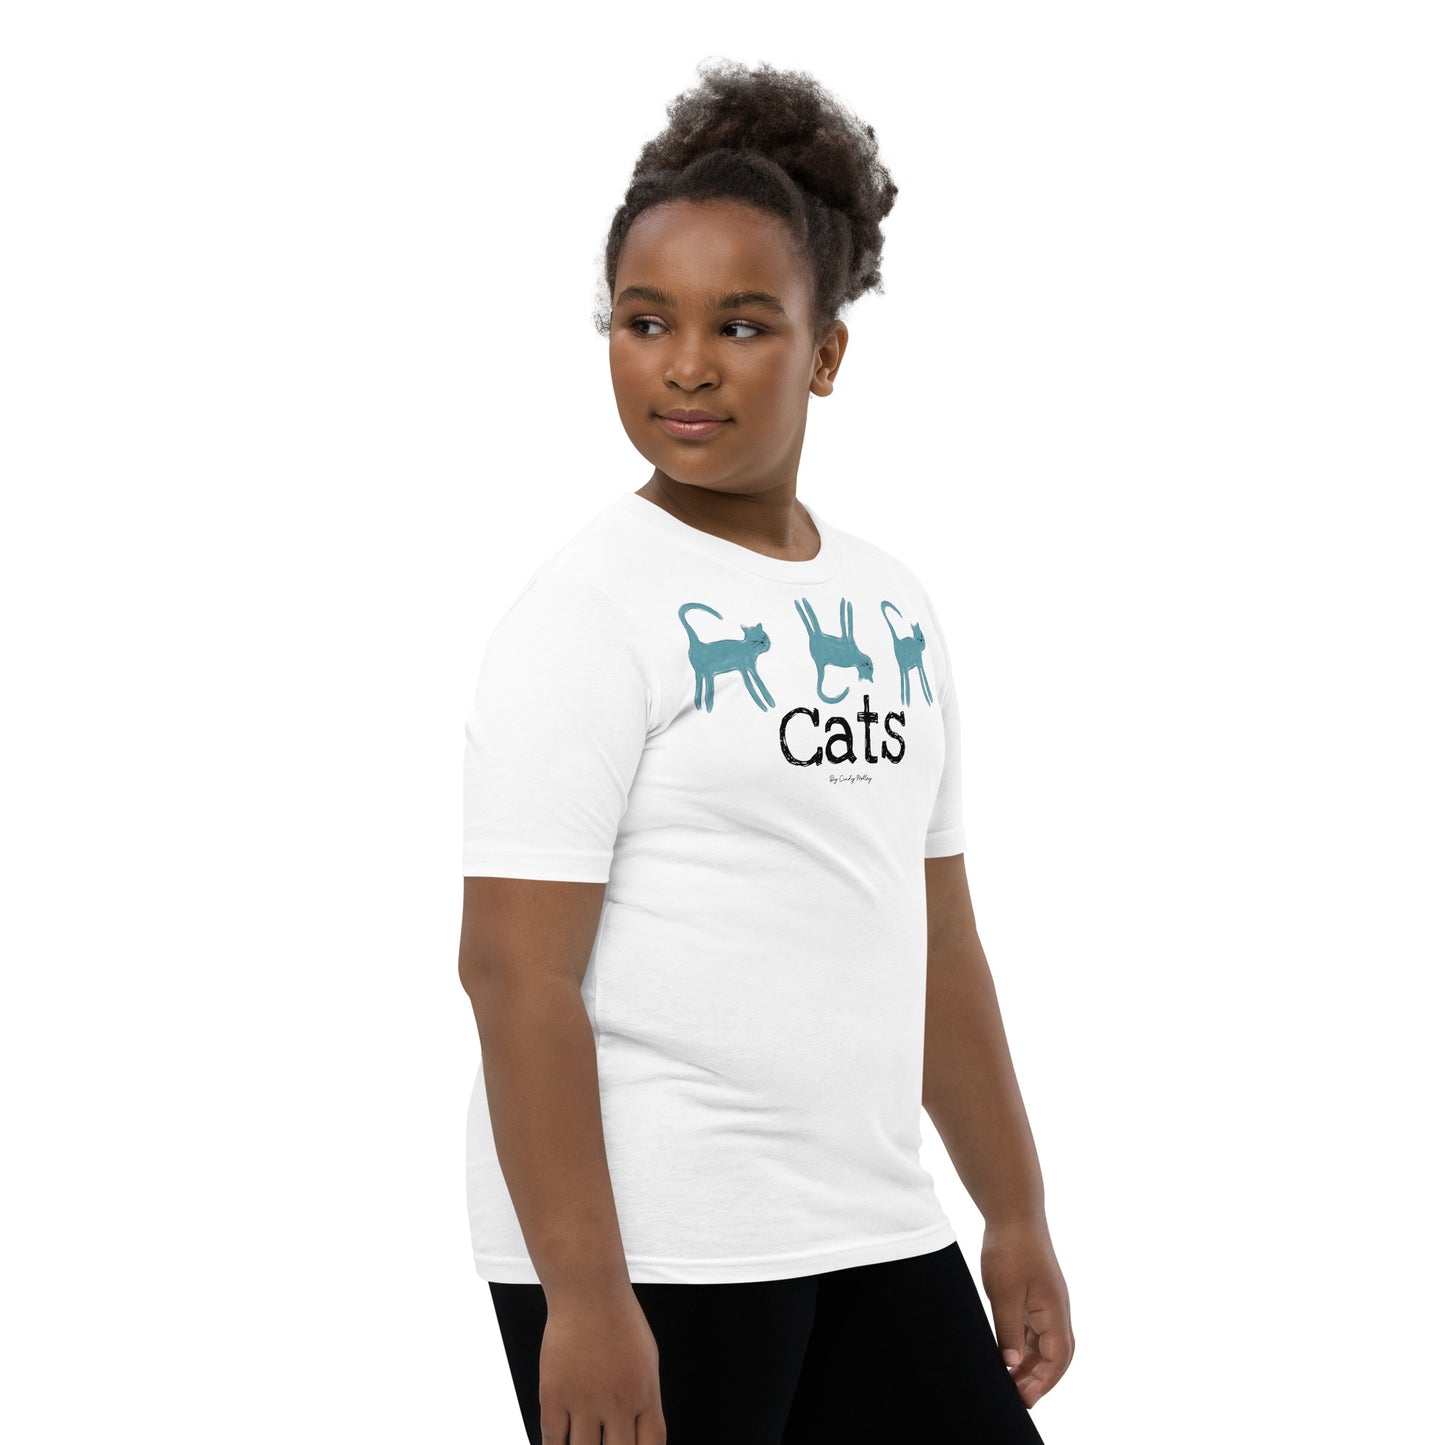 Cats By Cindy Motley Youth Short Sleeve T-Shirt